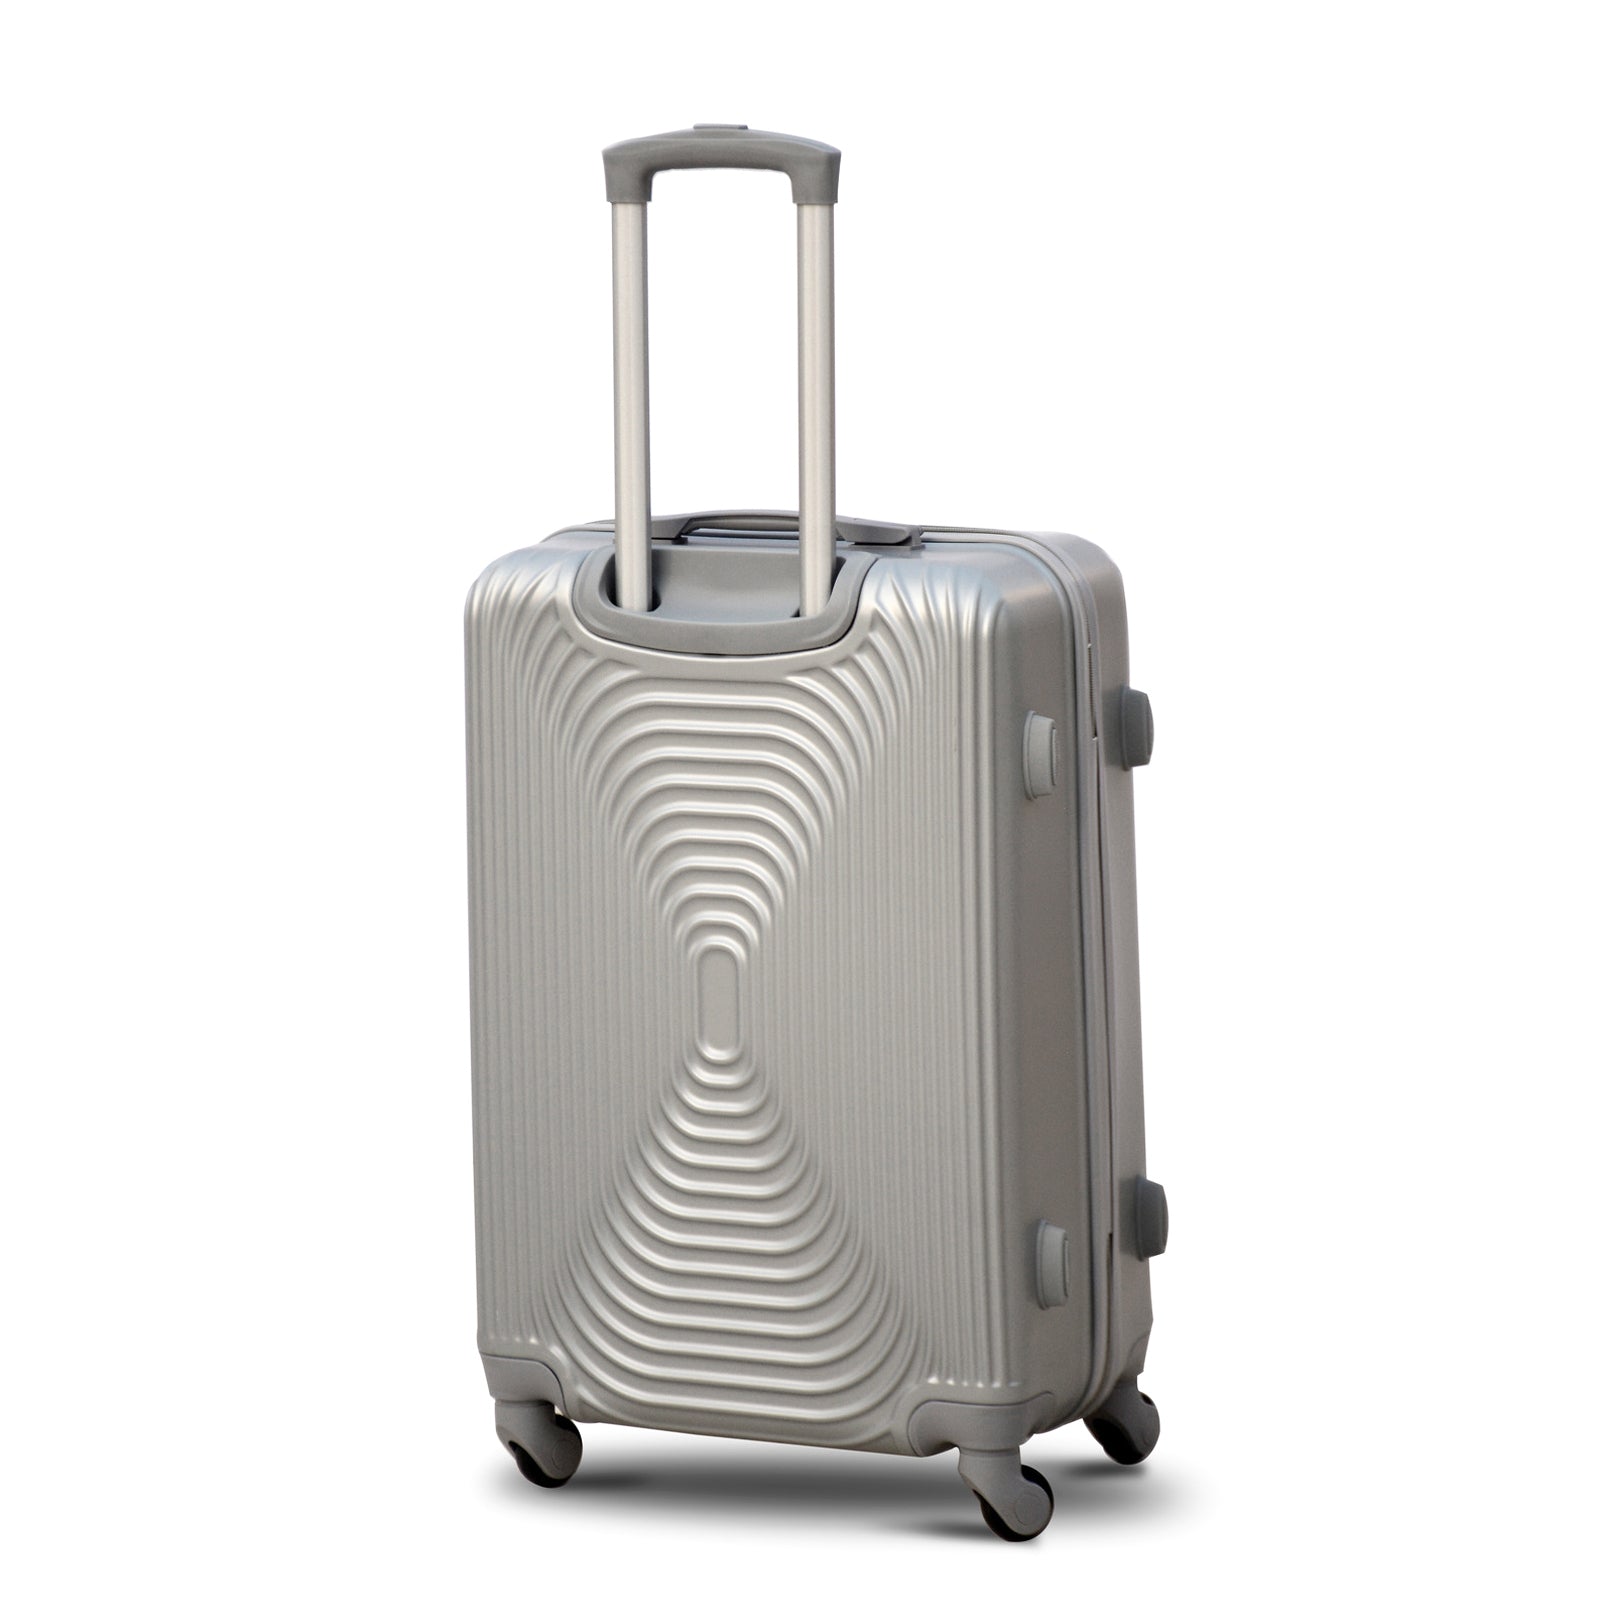 20 Inches Silver Fashion ABS Luggage Lightweight Hard Case Trolley Bag with Spinner Wheel